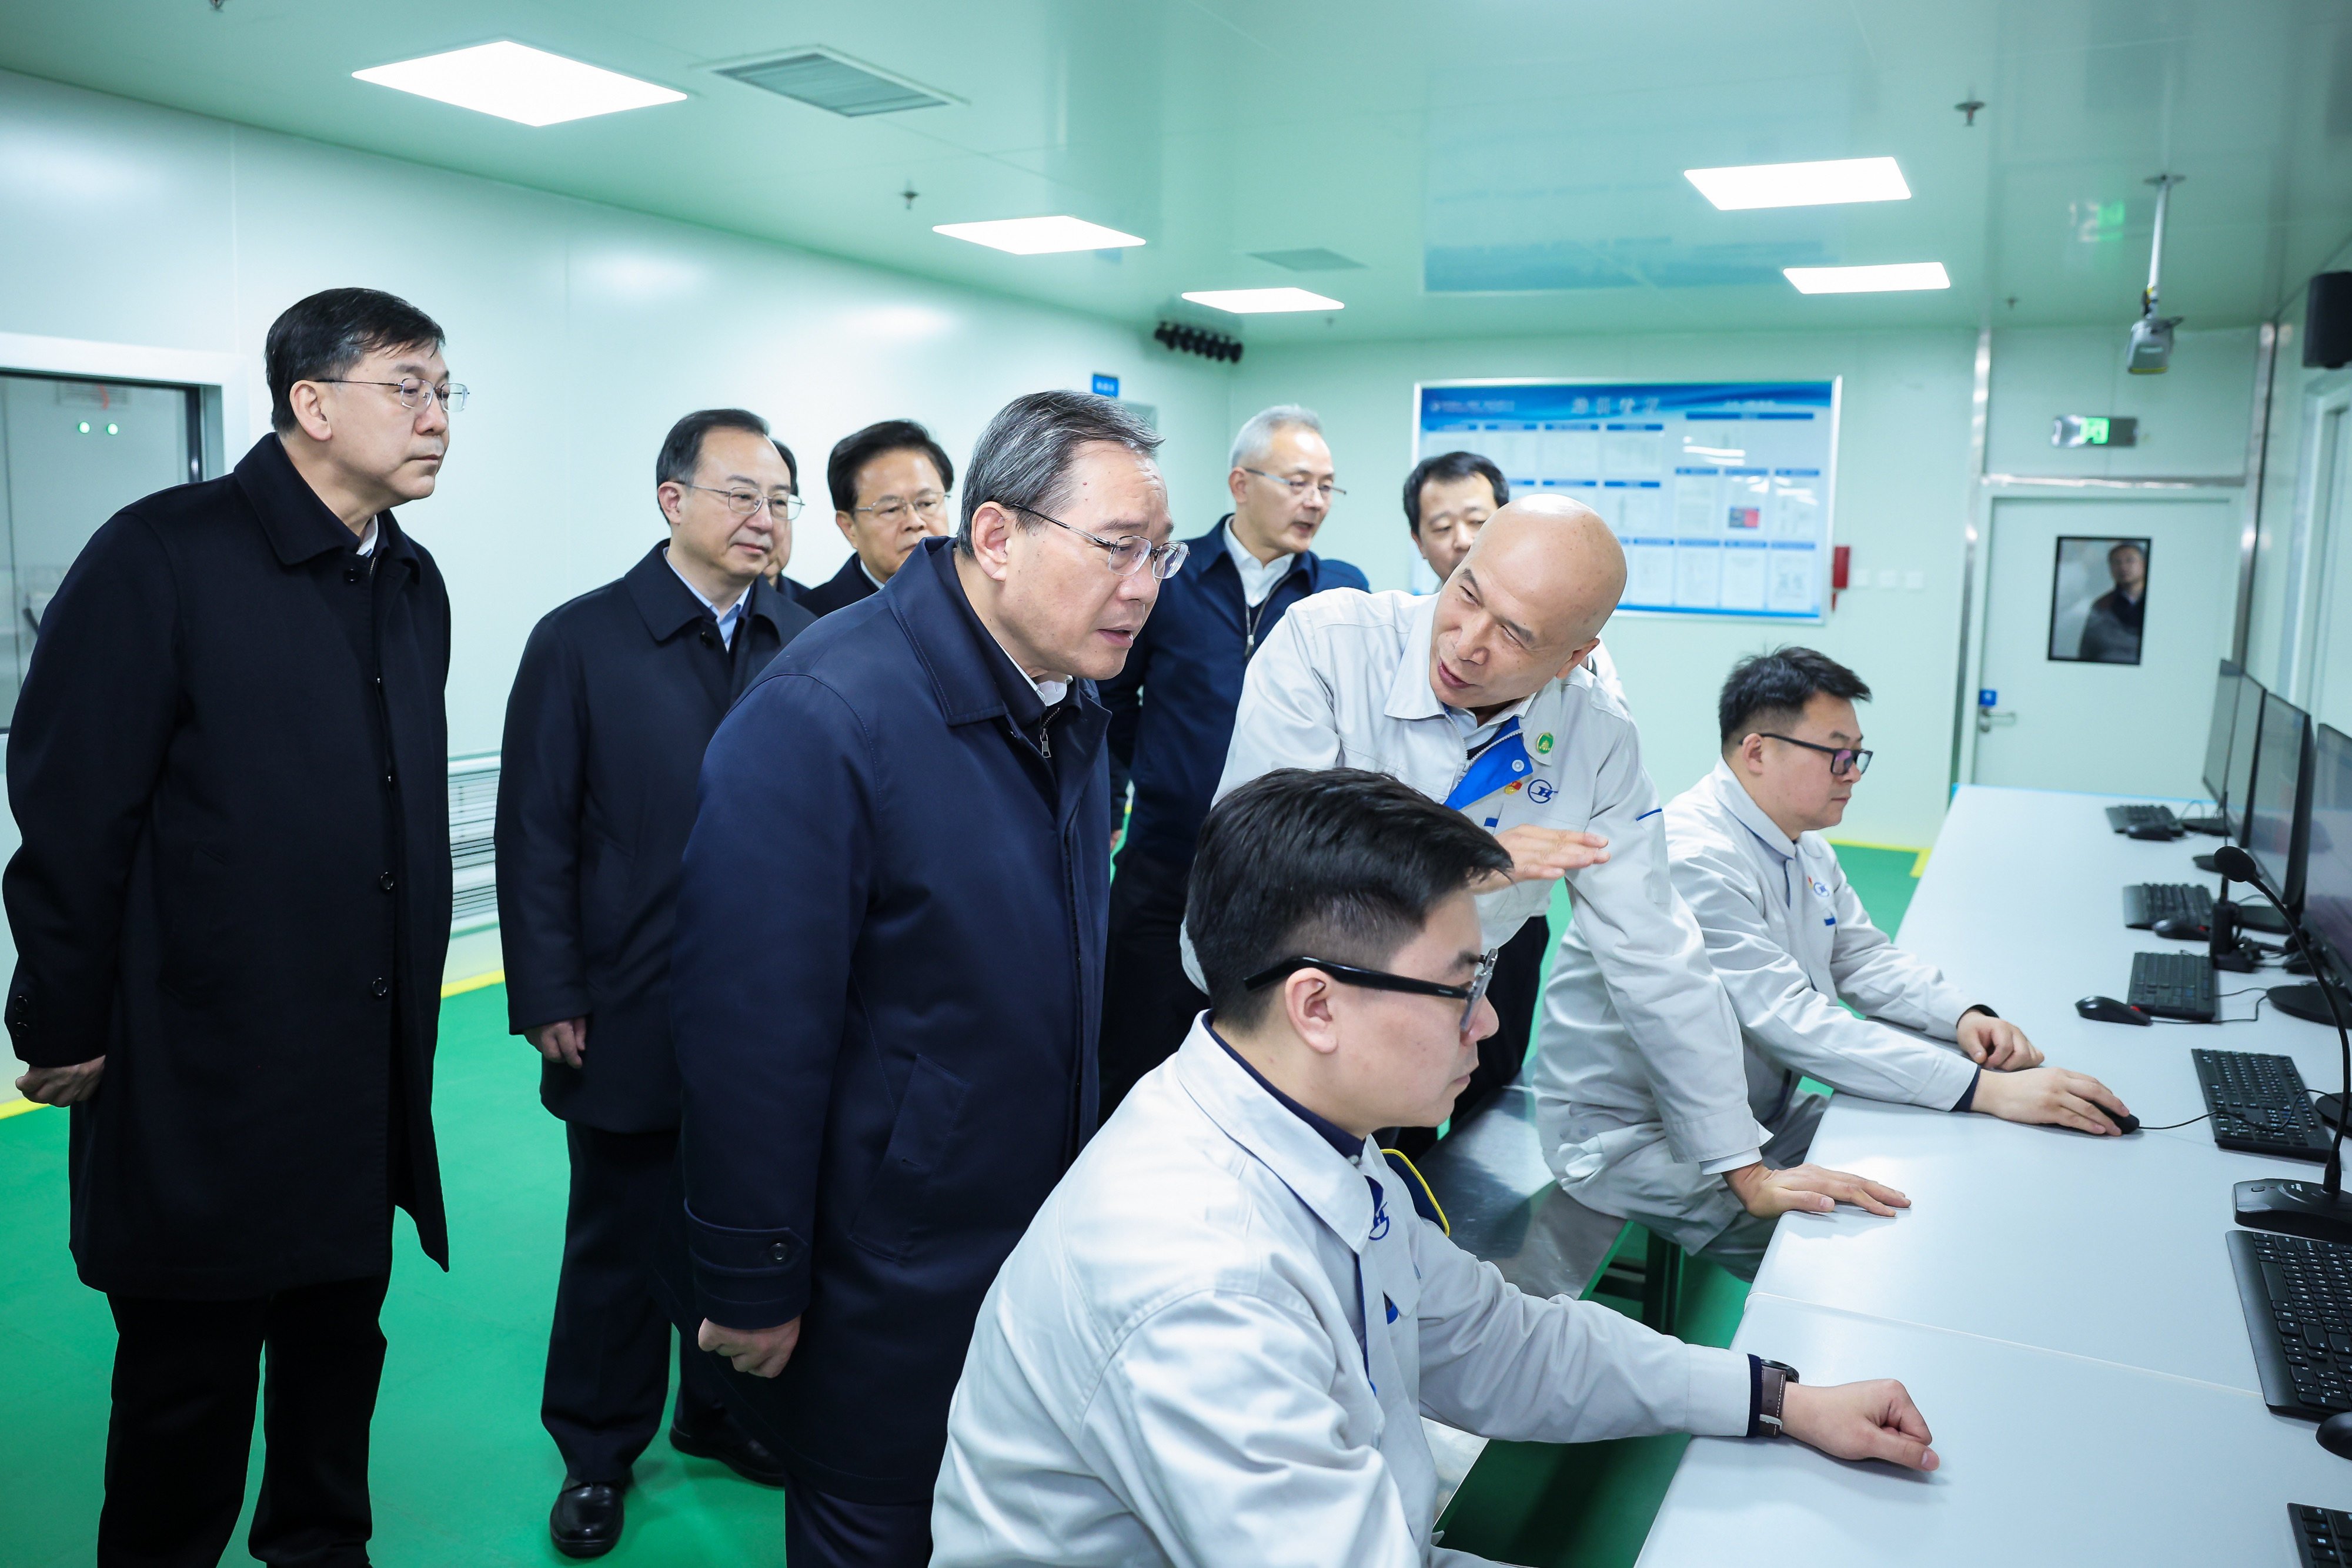 Premier Li Qiang visits a display devices company in Xianyang in northwest China’s Shaanxi province on Monday. Photo: Xinhua